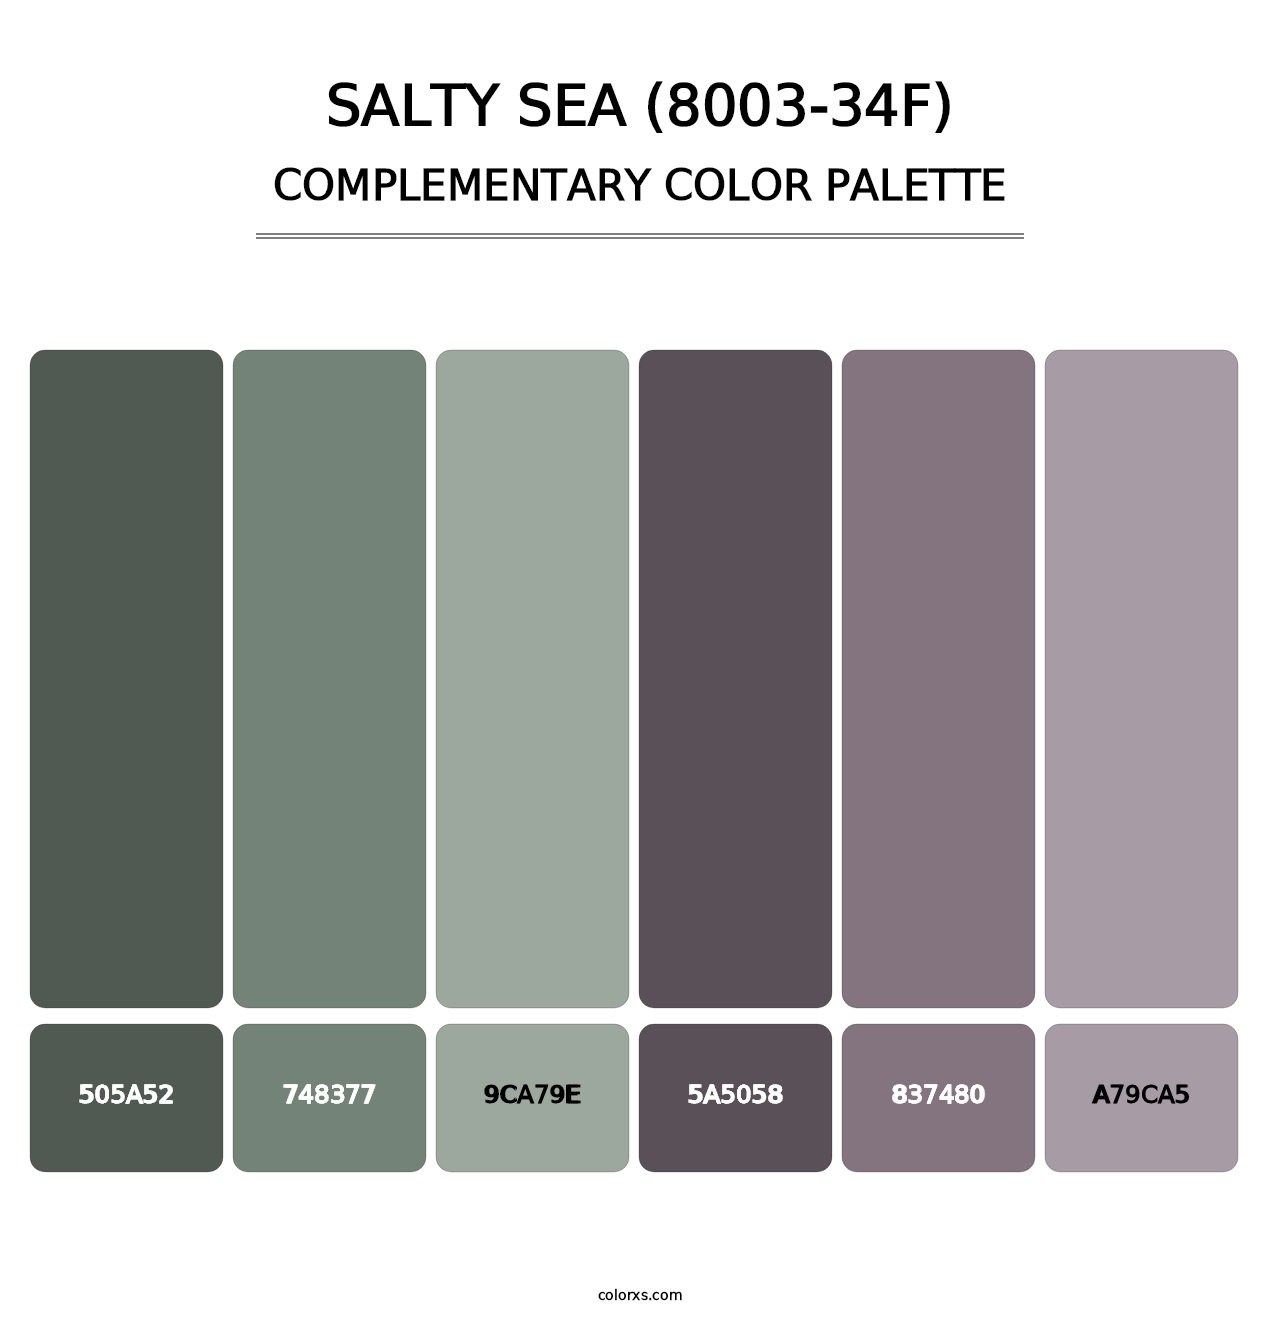 Salty Sea (8003-34F) - Complementary Color Palette